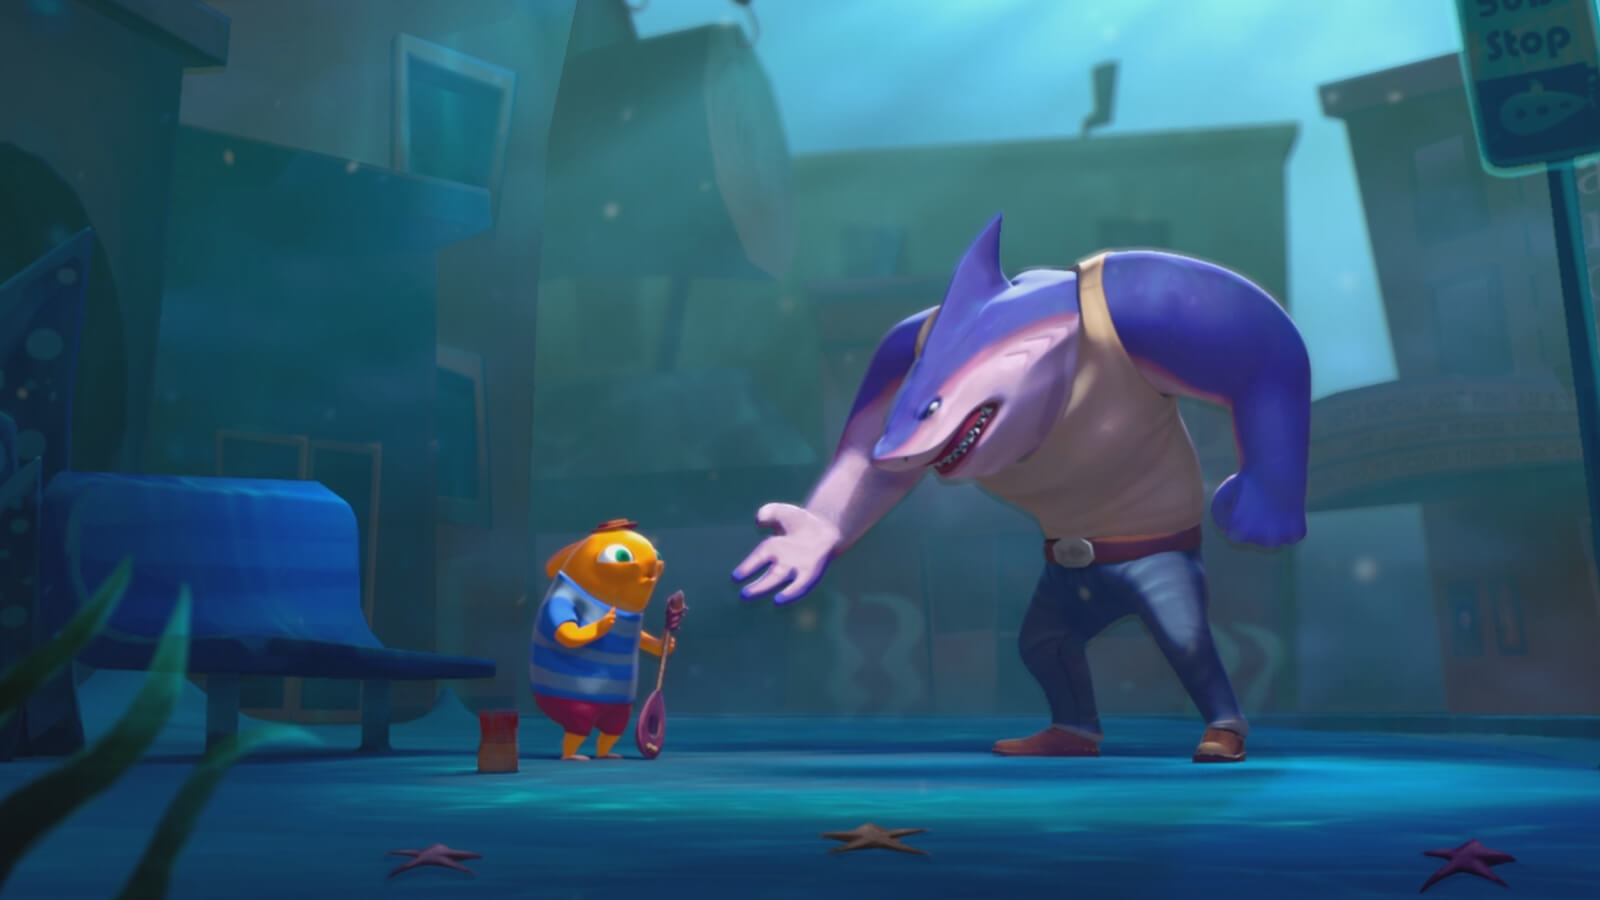 At a bus stop underwater, a large purple shark in jeans confronts a smaller orange fish in a striped t-shirt holding a banjo